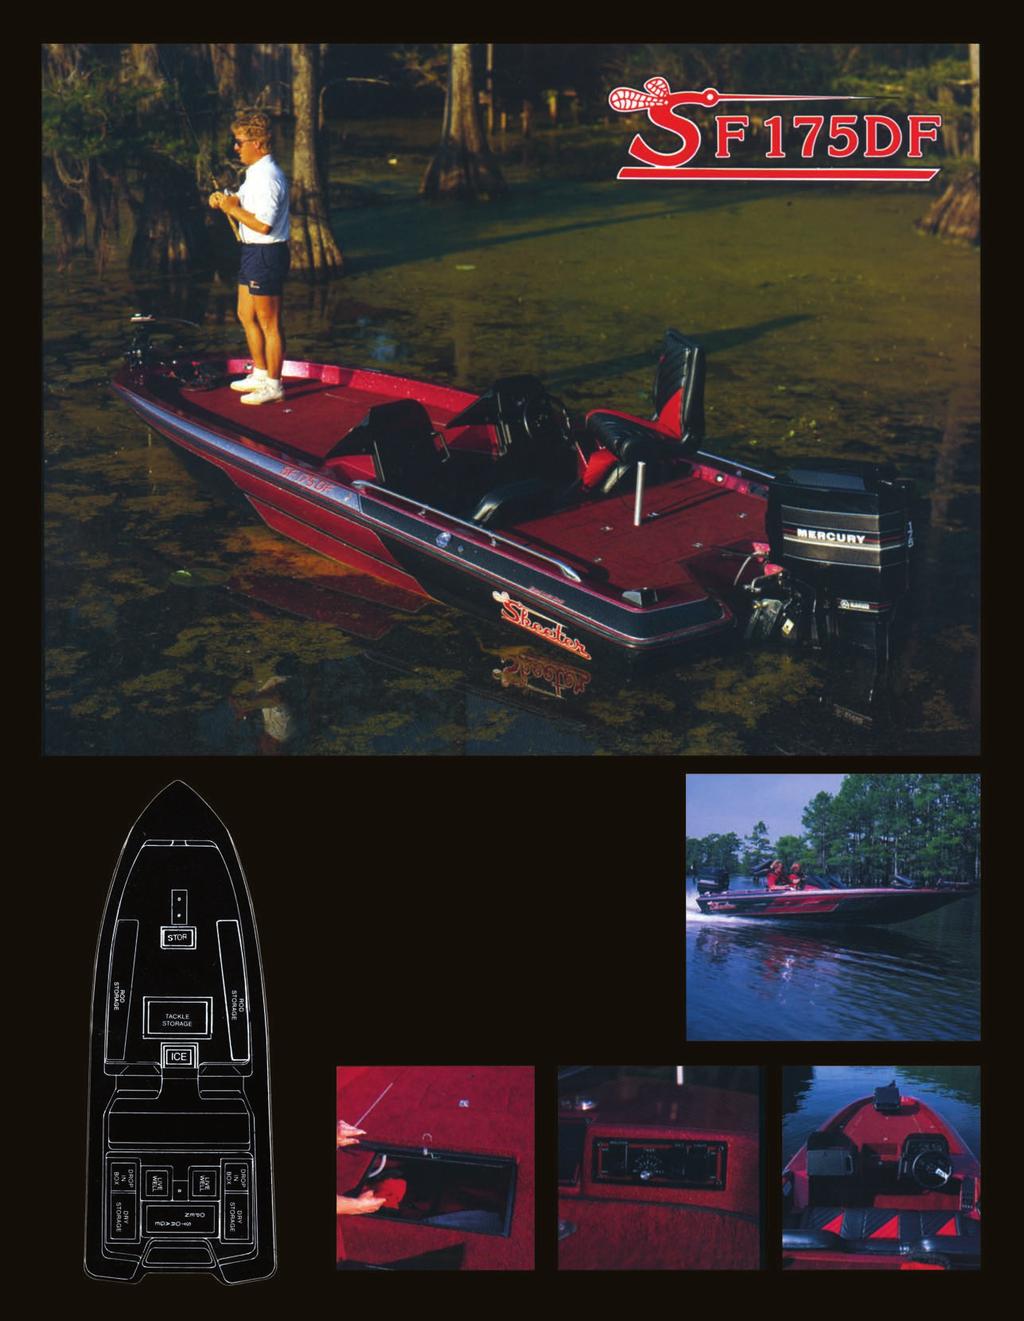 S keeter has taken the duel console concept one step ahead by offering a full deck from bow to console, providing you with a maximum size fishing deck.